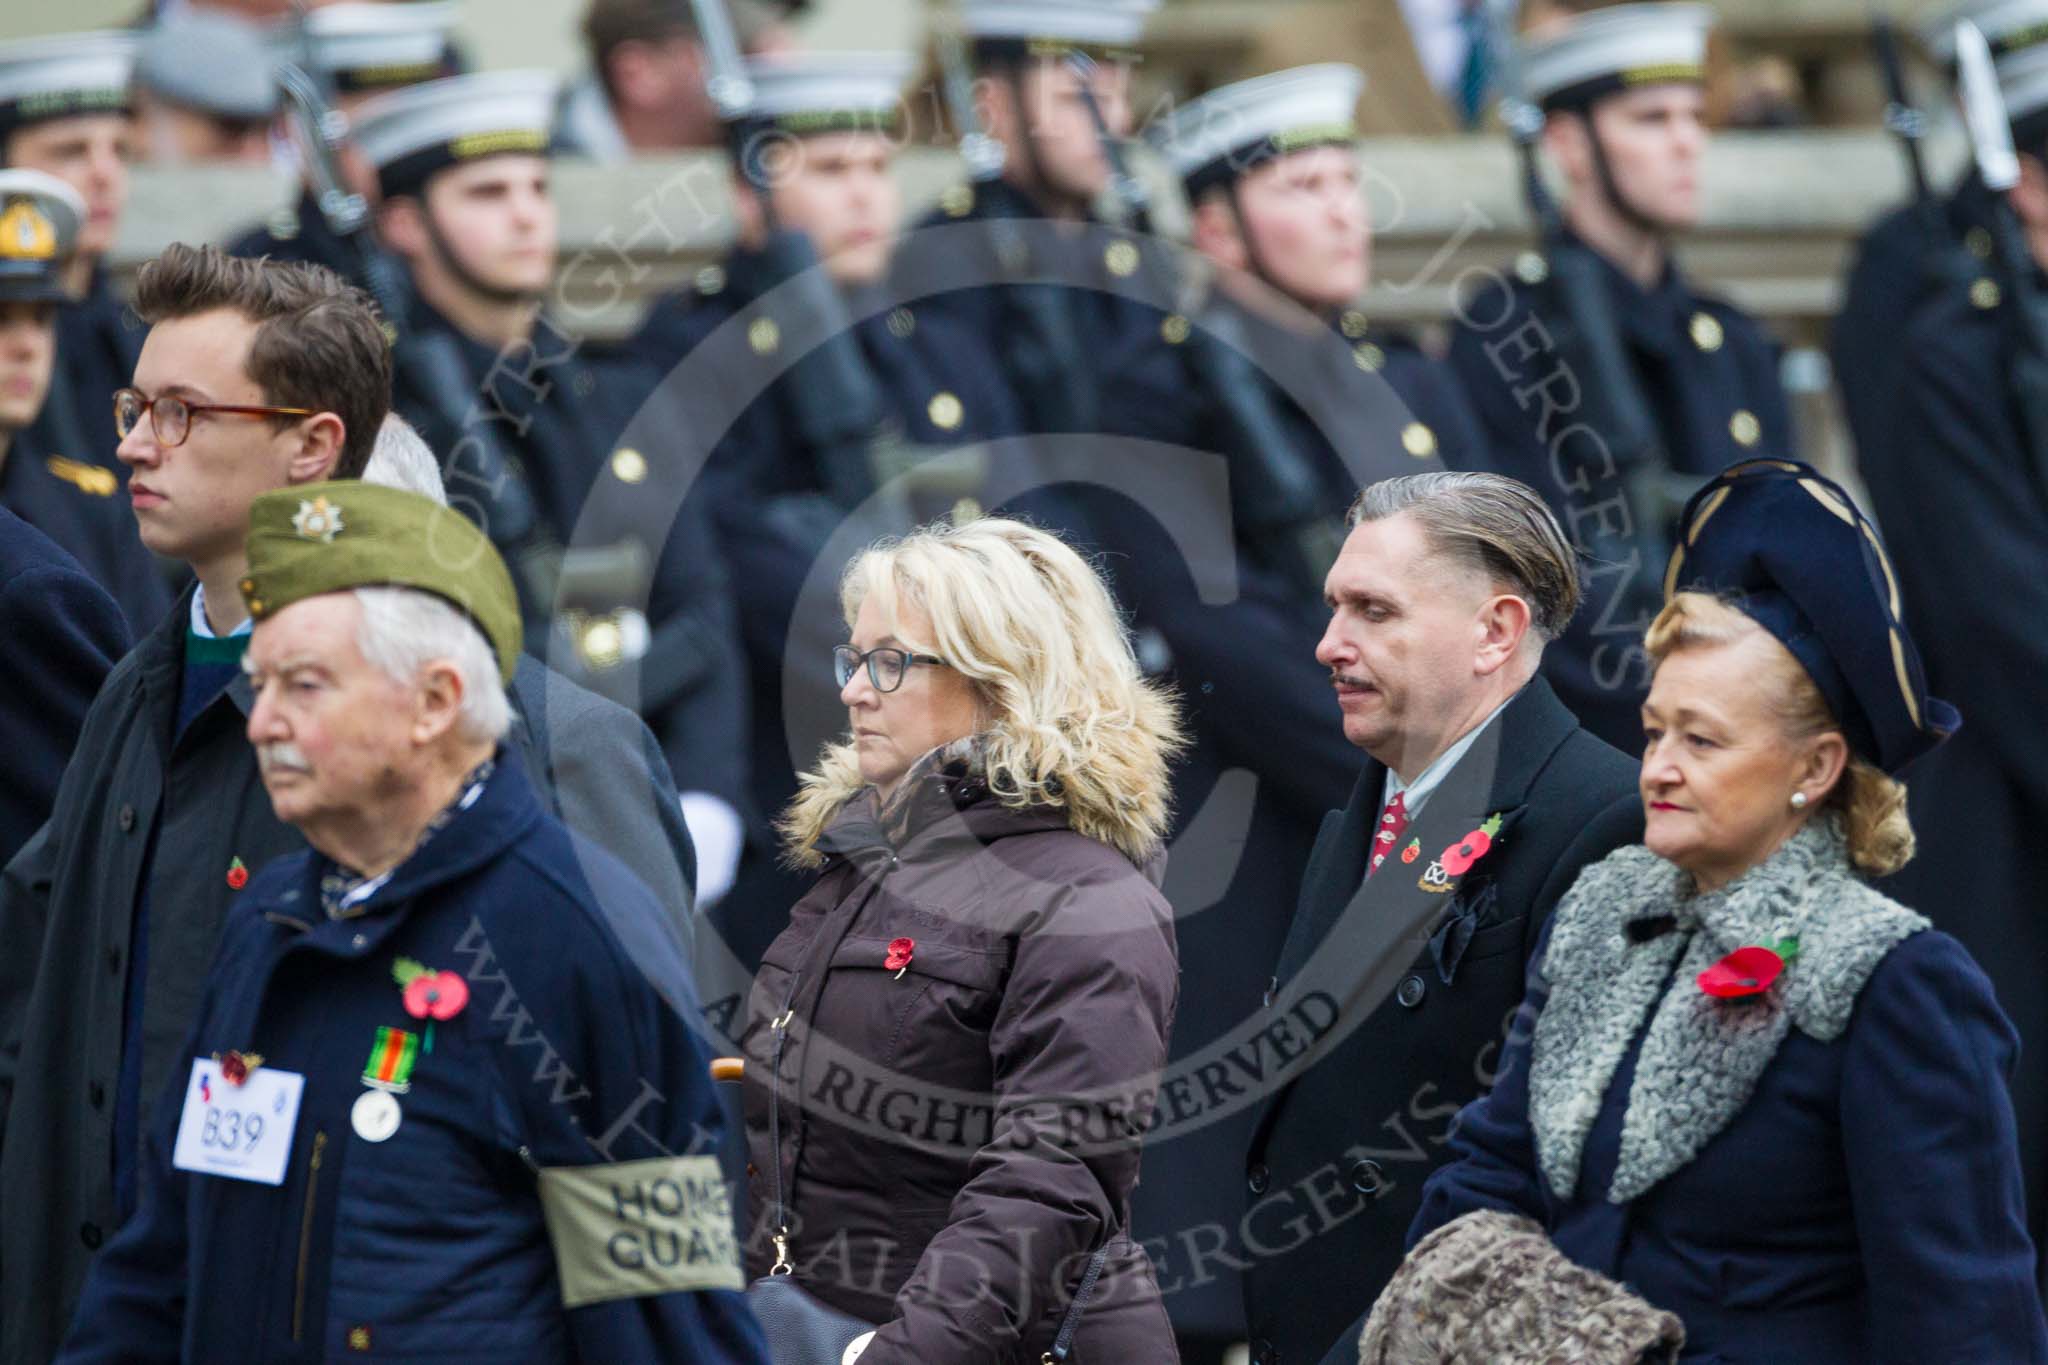 Remembrance Sunday at the Cenotaph 2015: Group B39, Home Guard Association.
Cenotaph, Whitehall, London SW1,
London,
Greater London,
United Kingdom,
on 08 November 2015 at 11:44, image #309